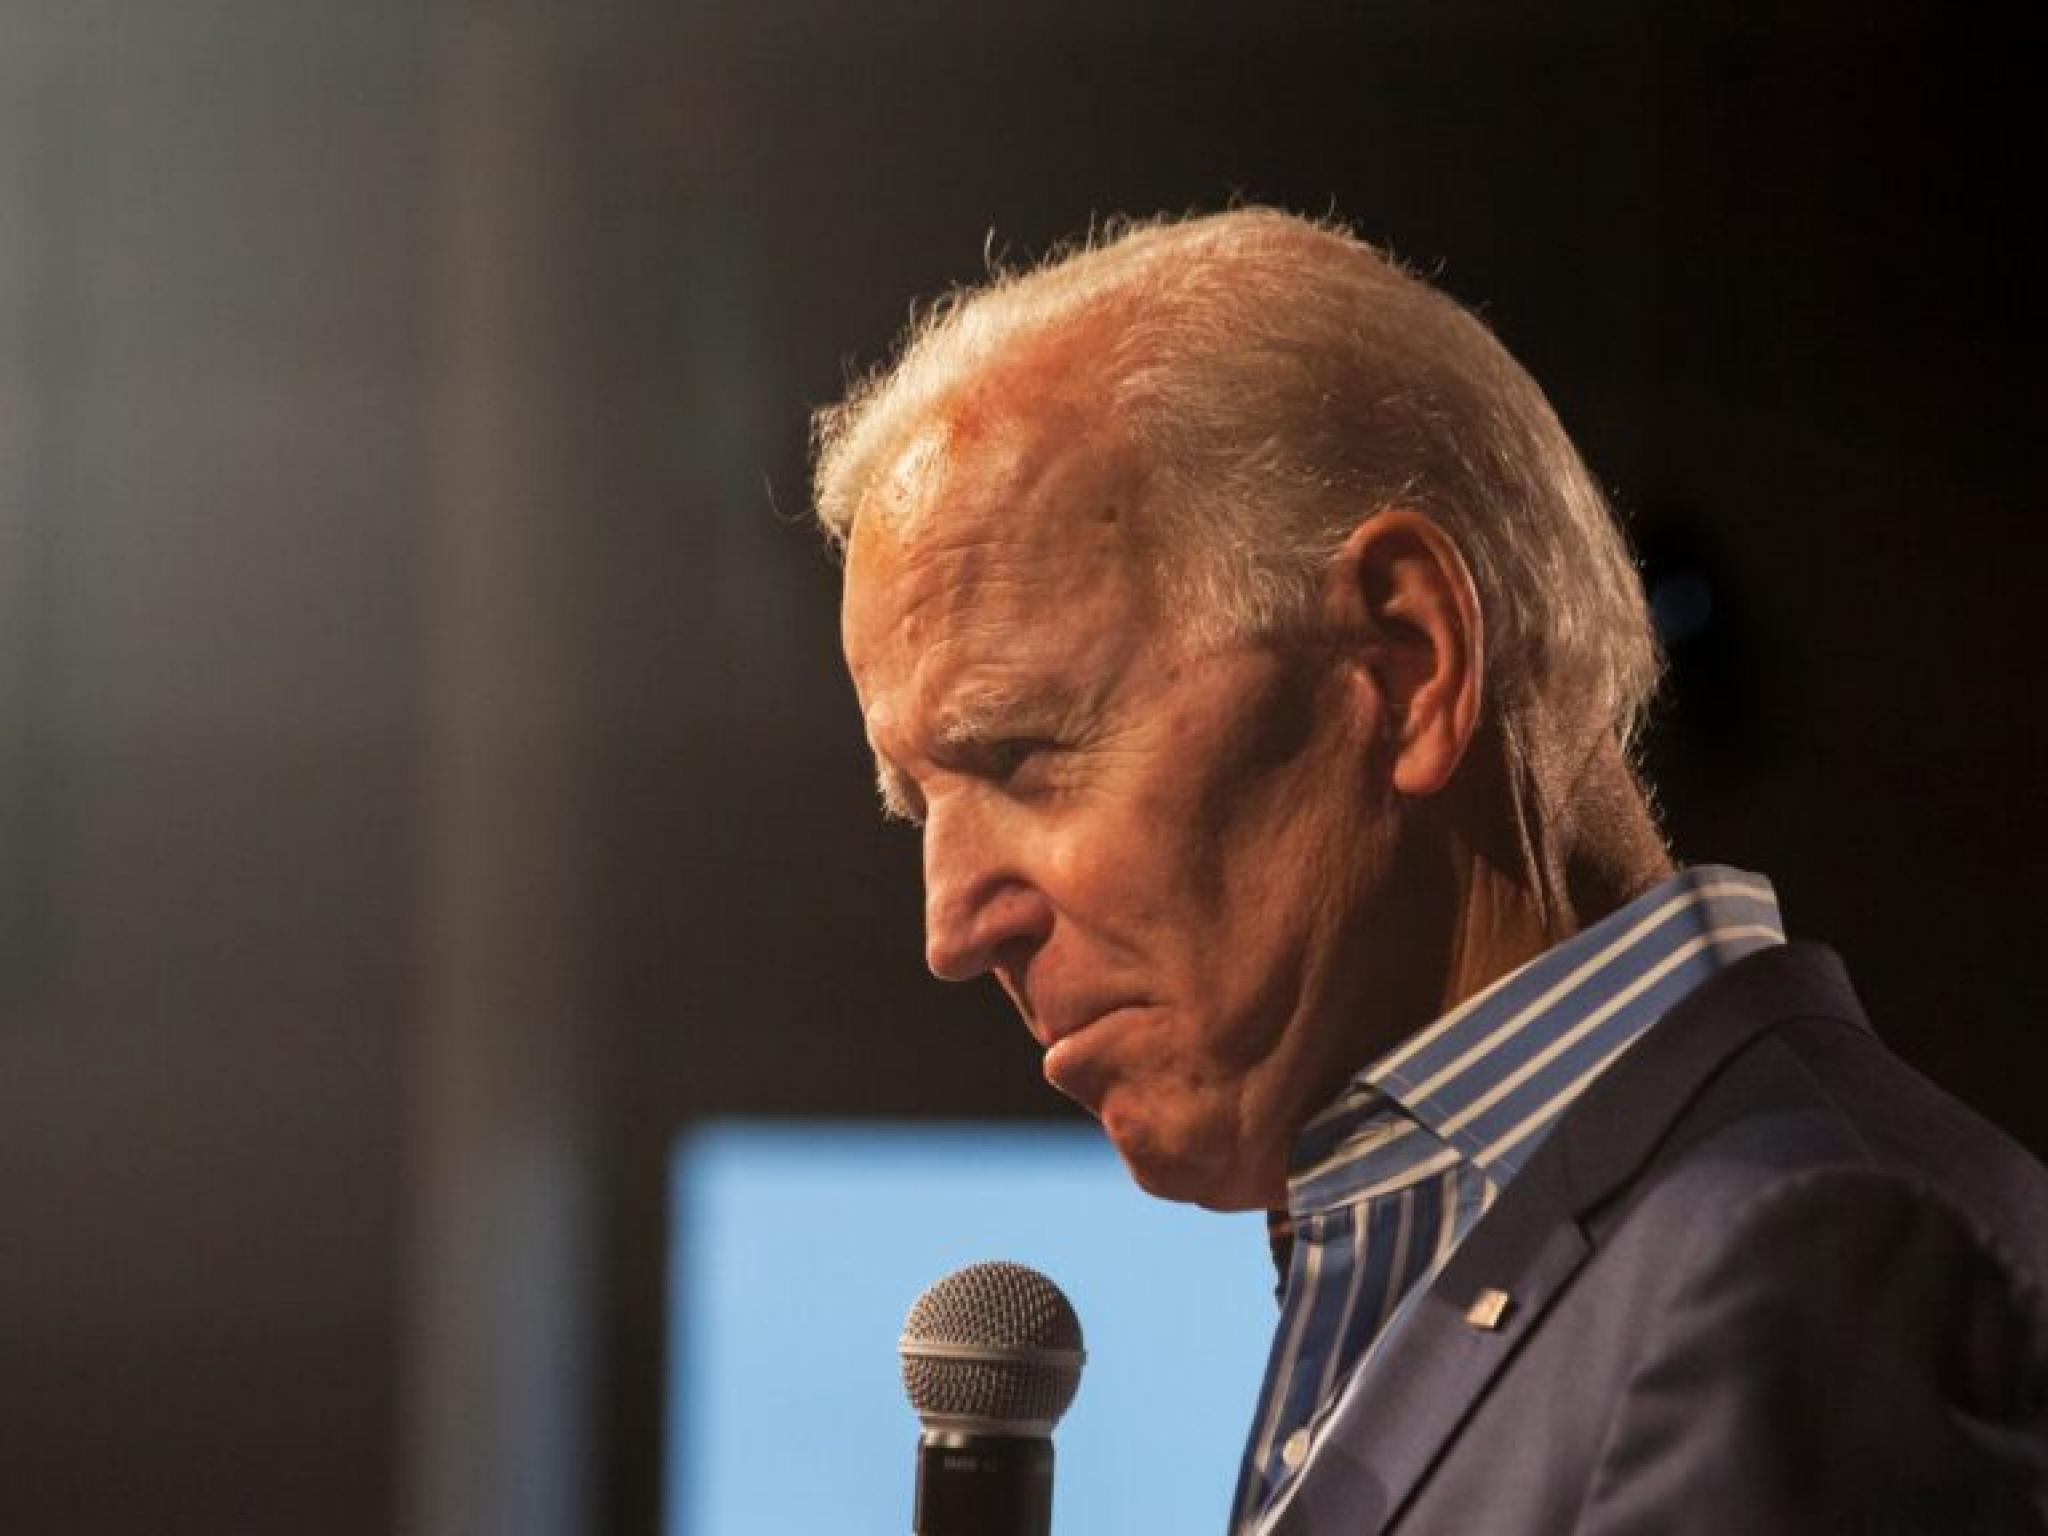  biden-says-ai-companies-must-earn-our-trust-calls-for-responsible-innovation 